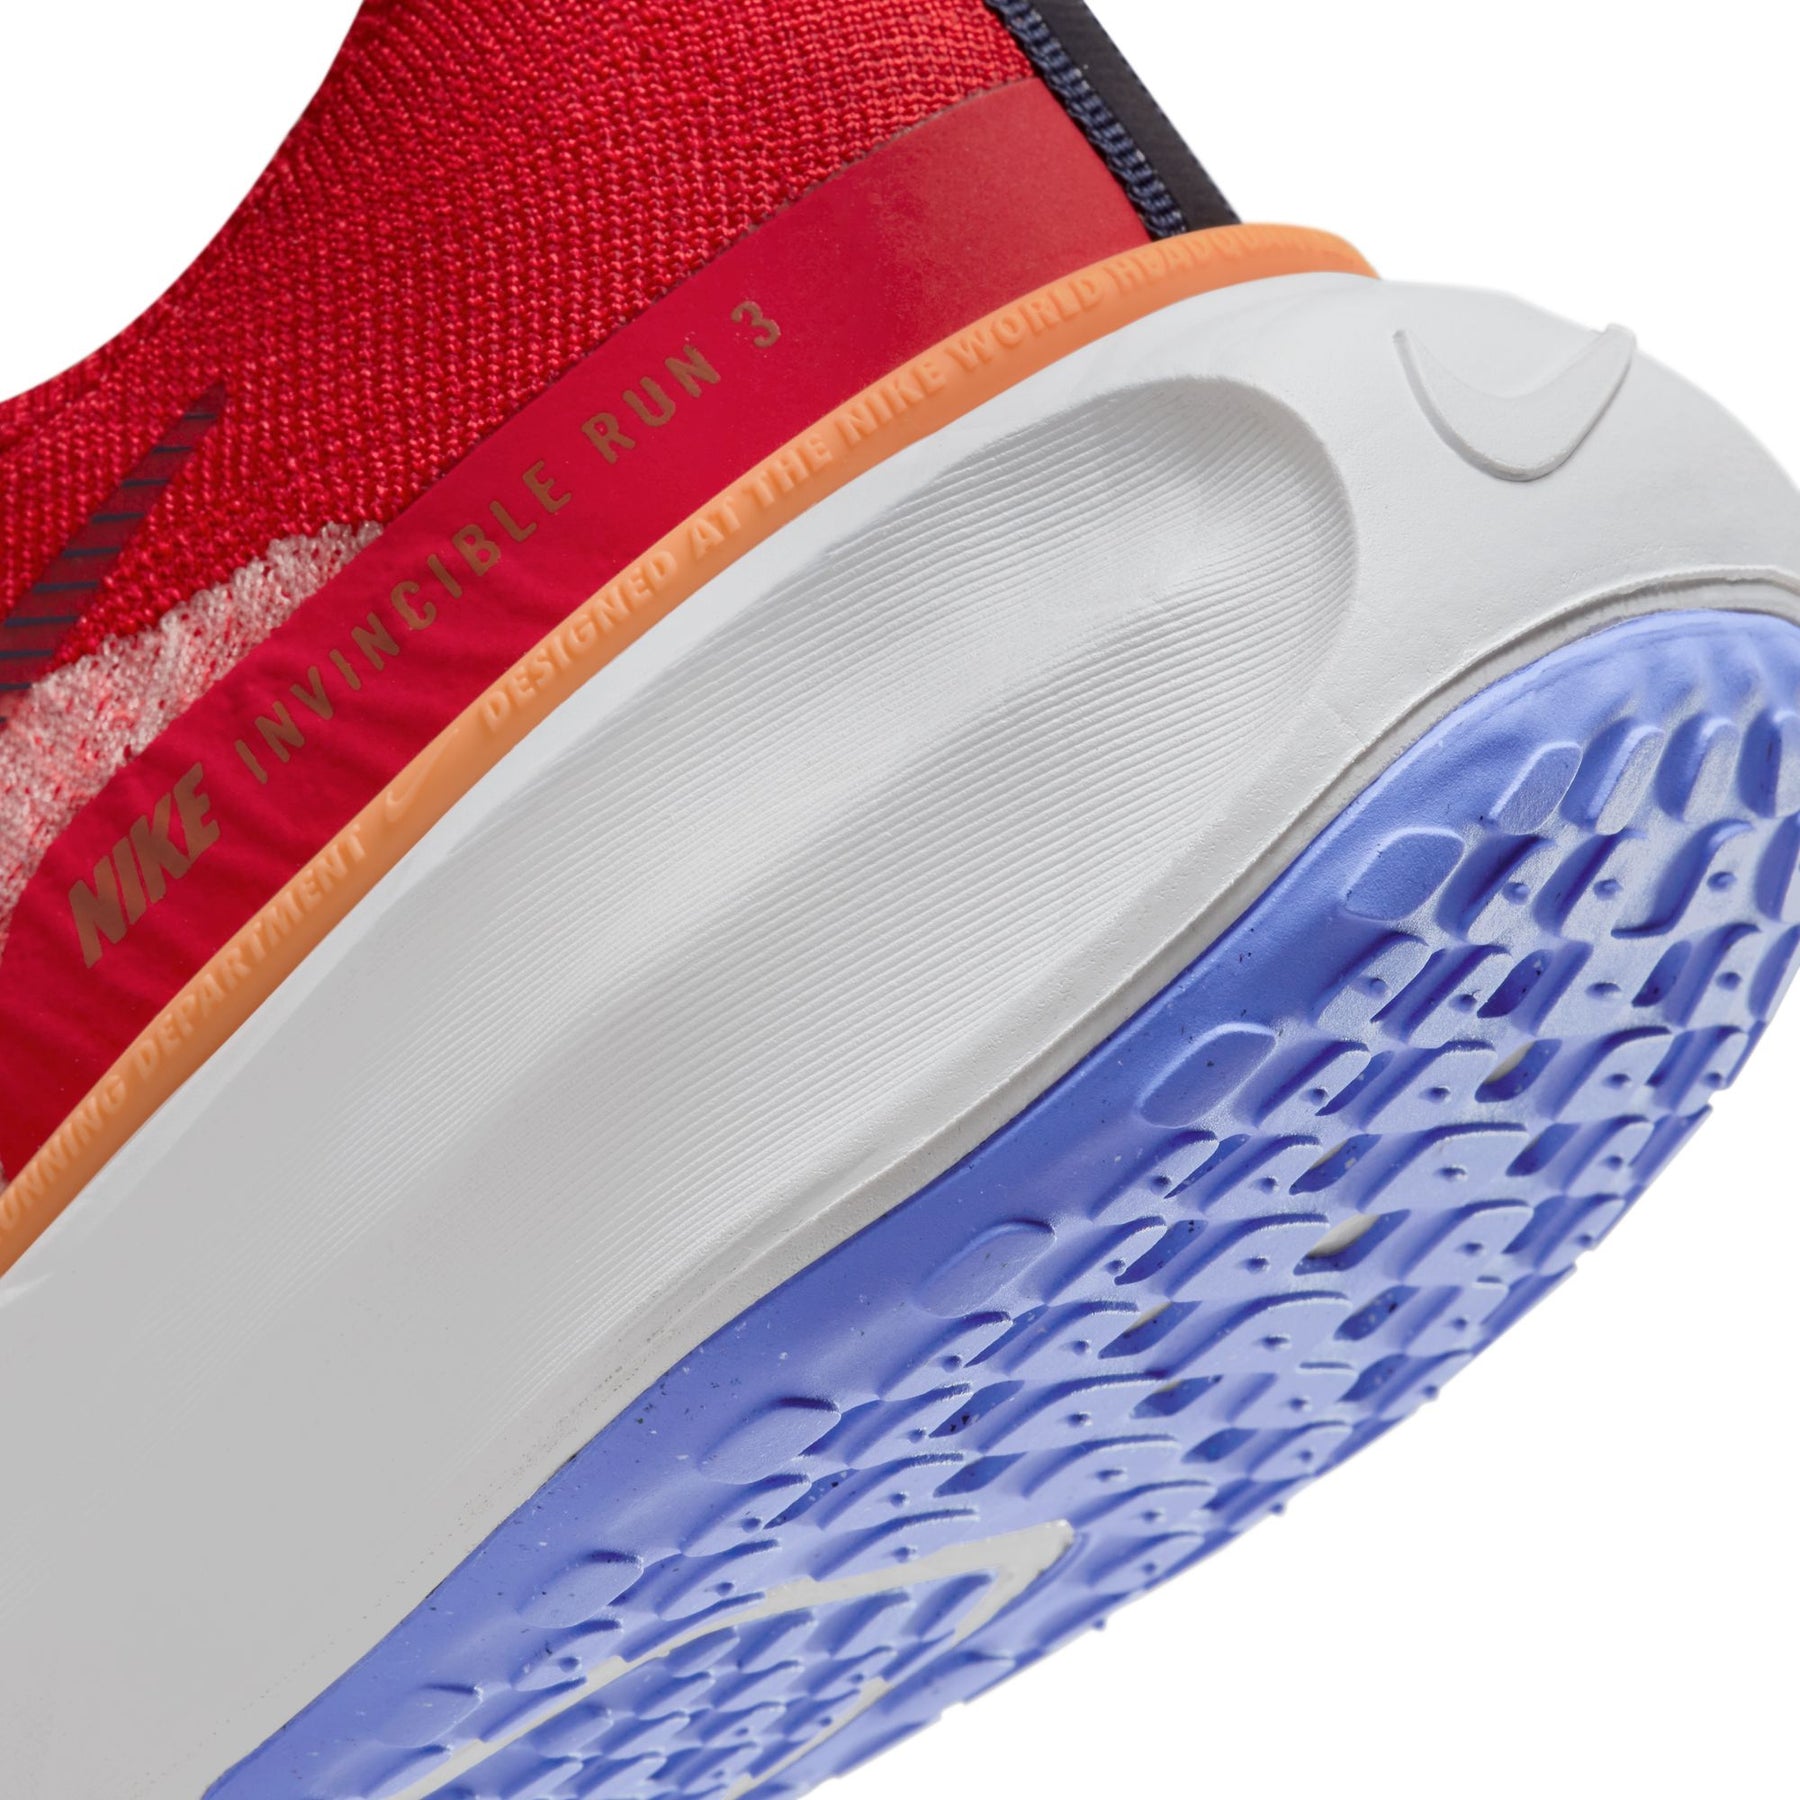 Nike ZoomX Invincible Run FK 3 (D Width) - University Red/Midnight Navy (Mens)